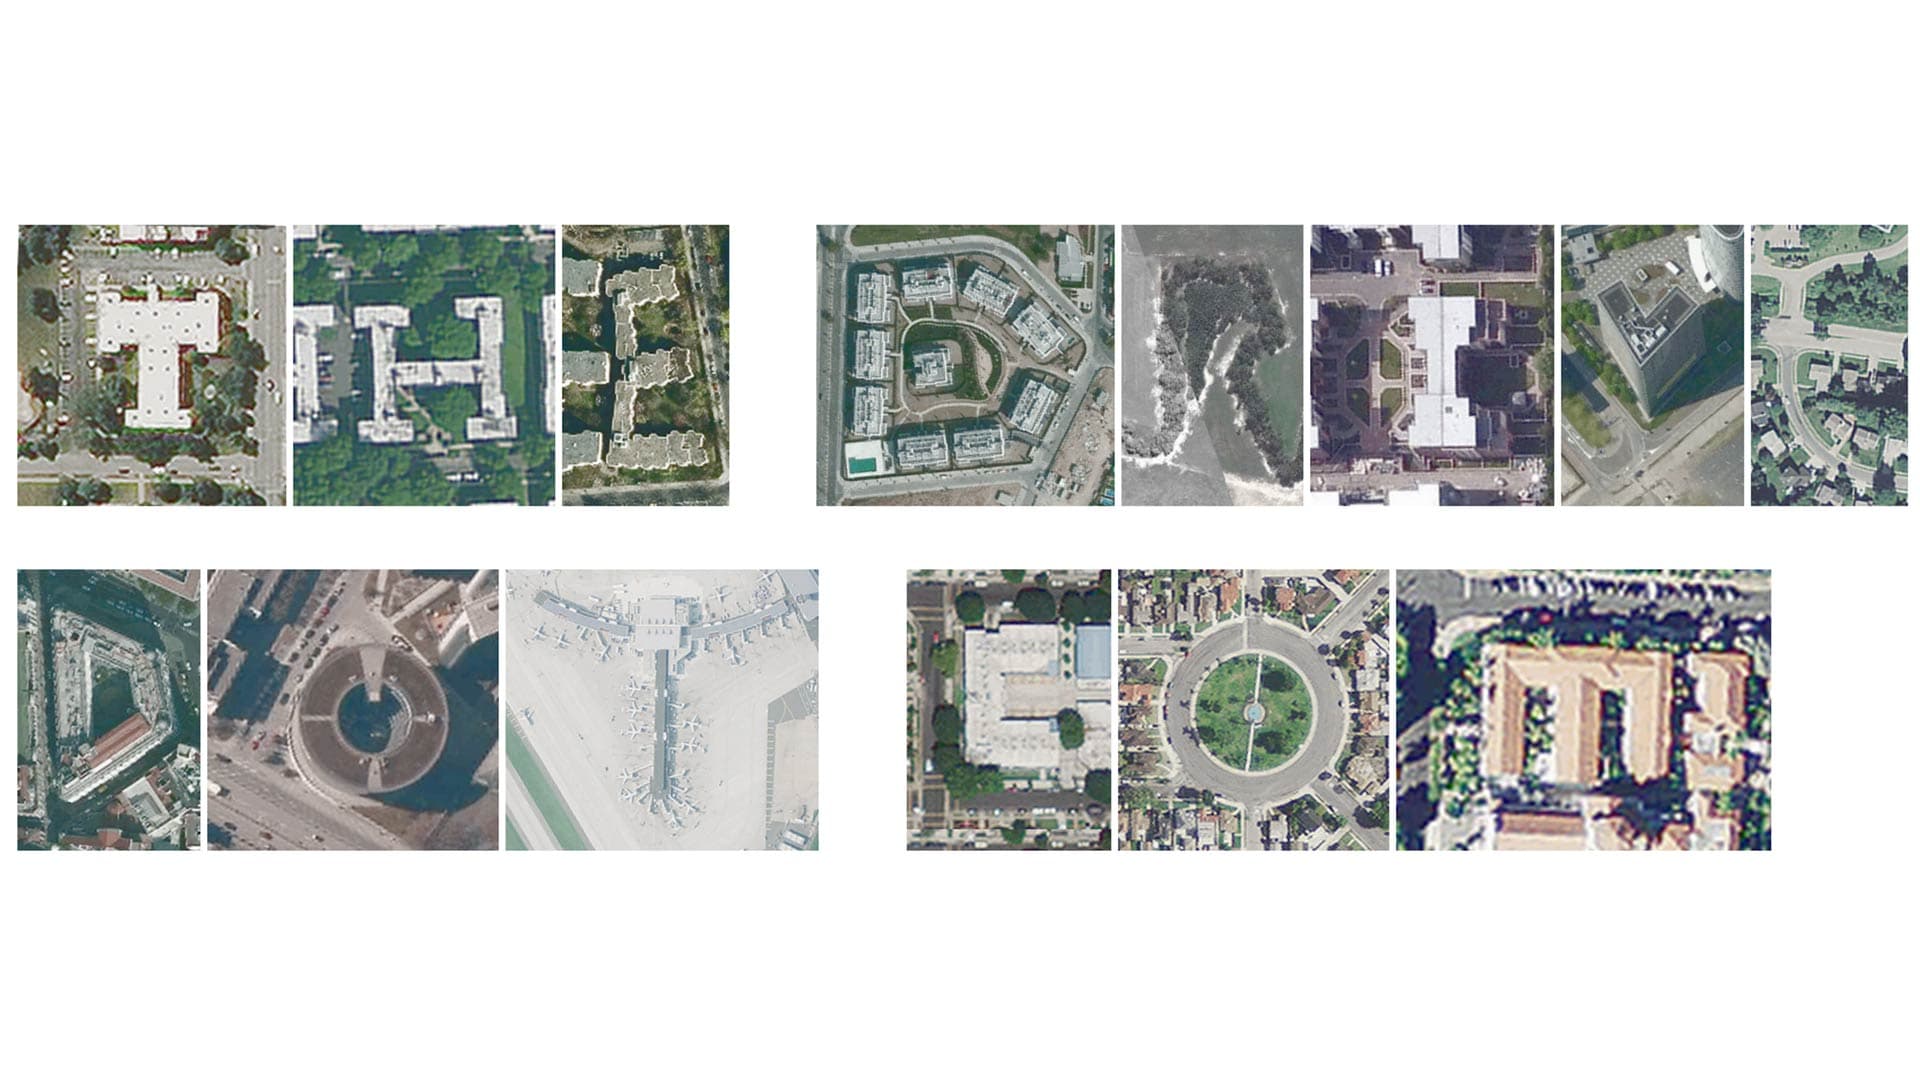 Write Your Name Using Satellite Images of Streets and Warehouses